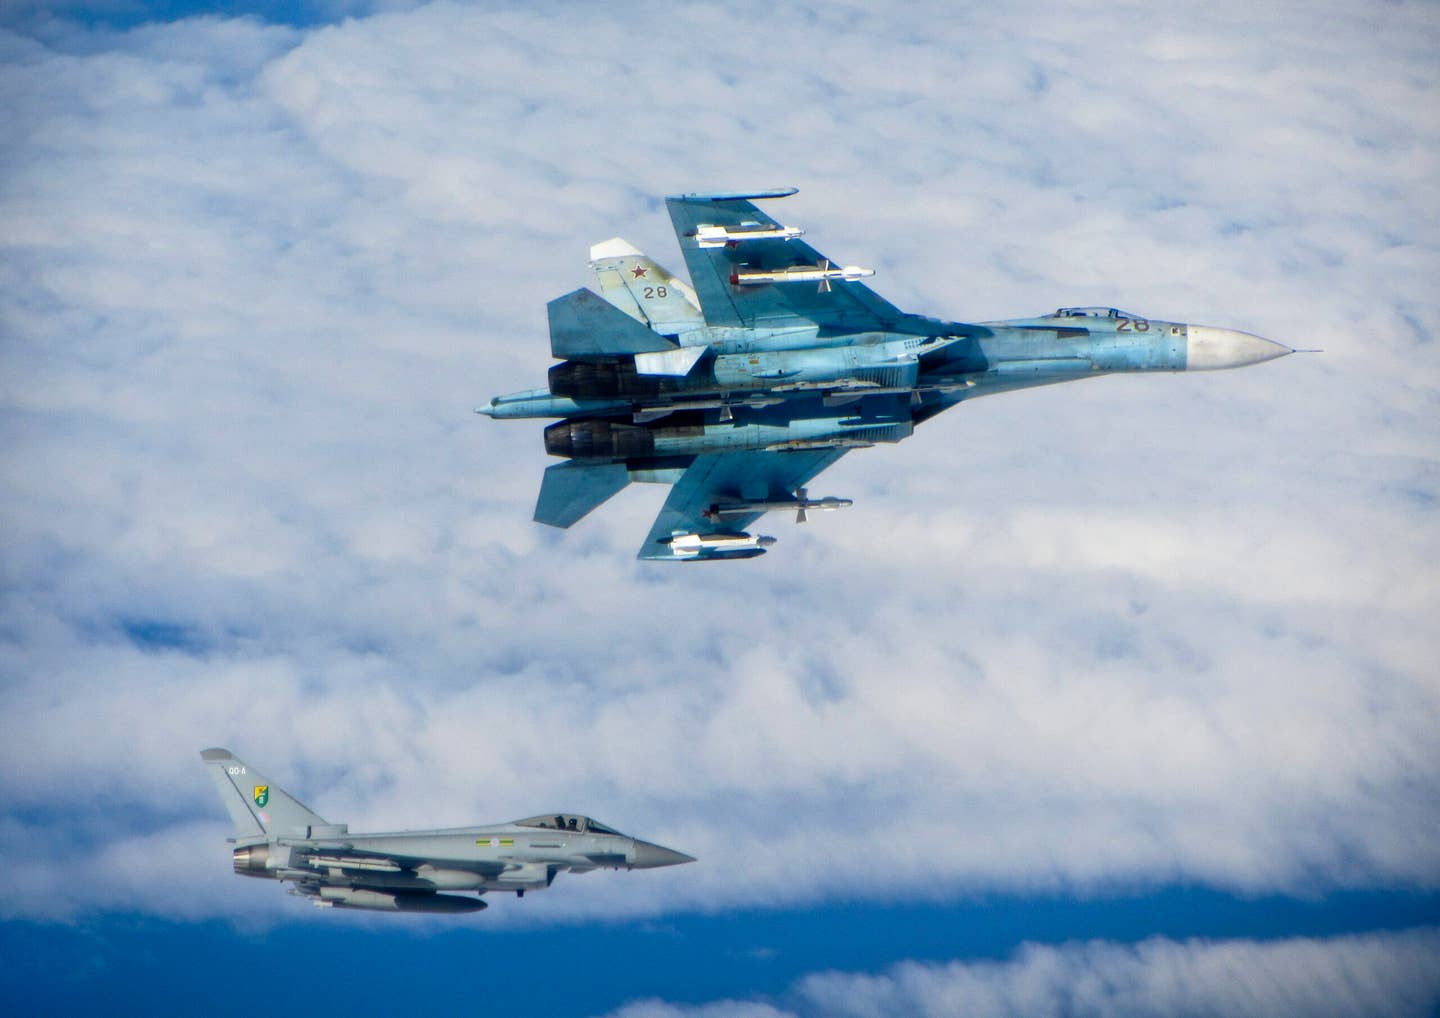 A Russian Su-27 Flanker banks away from an RAF Typhoon in international airspace over the Baltic Sea in June 2014. The Russian fighter is armed with a mix of radar- and infrared-guided R-27 and heat-seeking R-73 air-to-air missiles. <em>Crown Copyright</em>